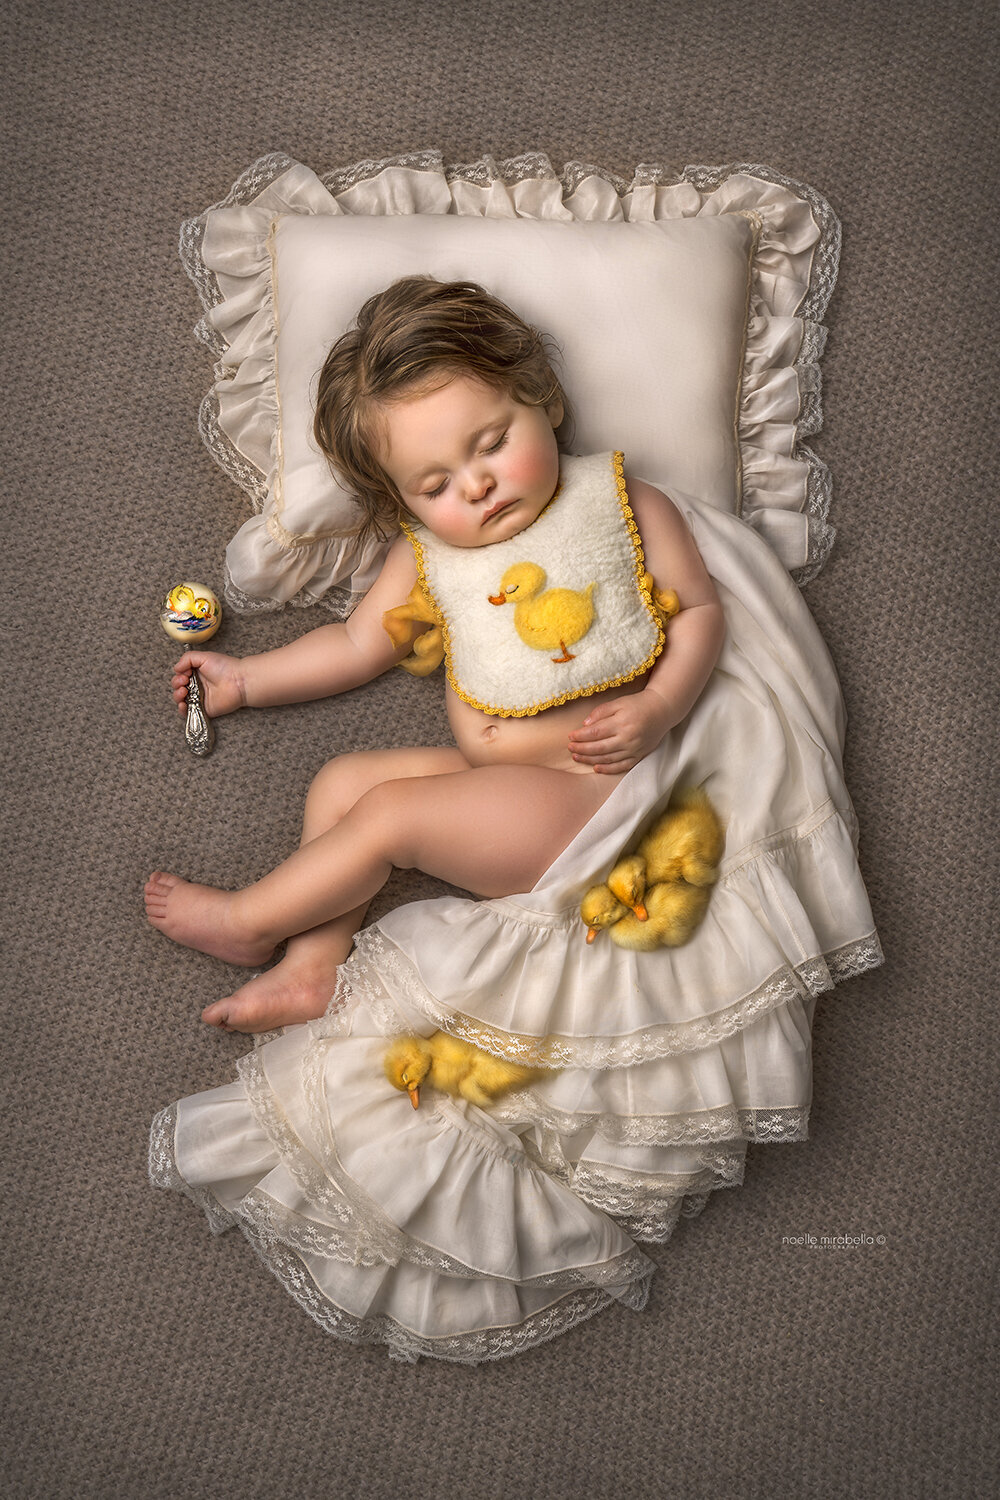 Baby wearing ducky bib sleeping with vintage blankets and baby ducklings.